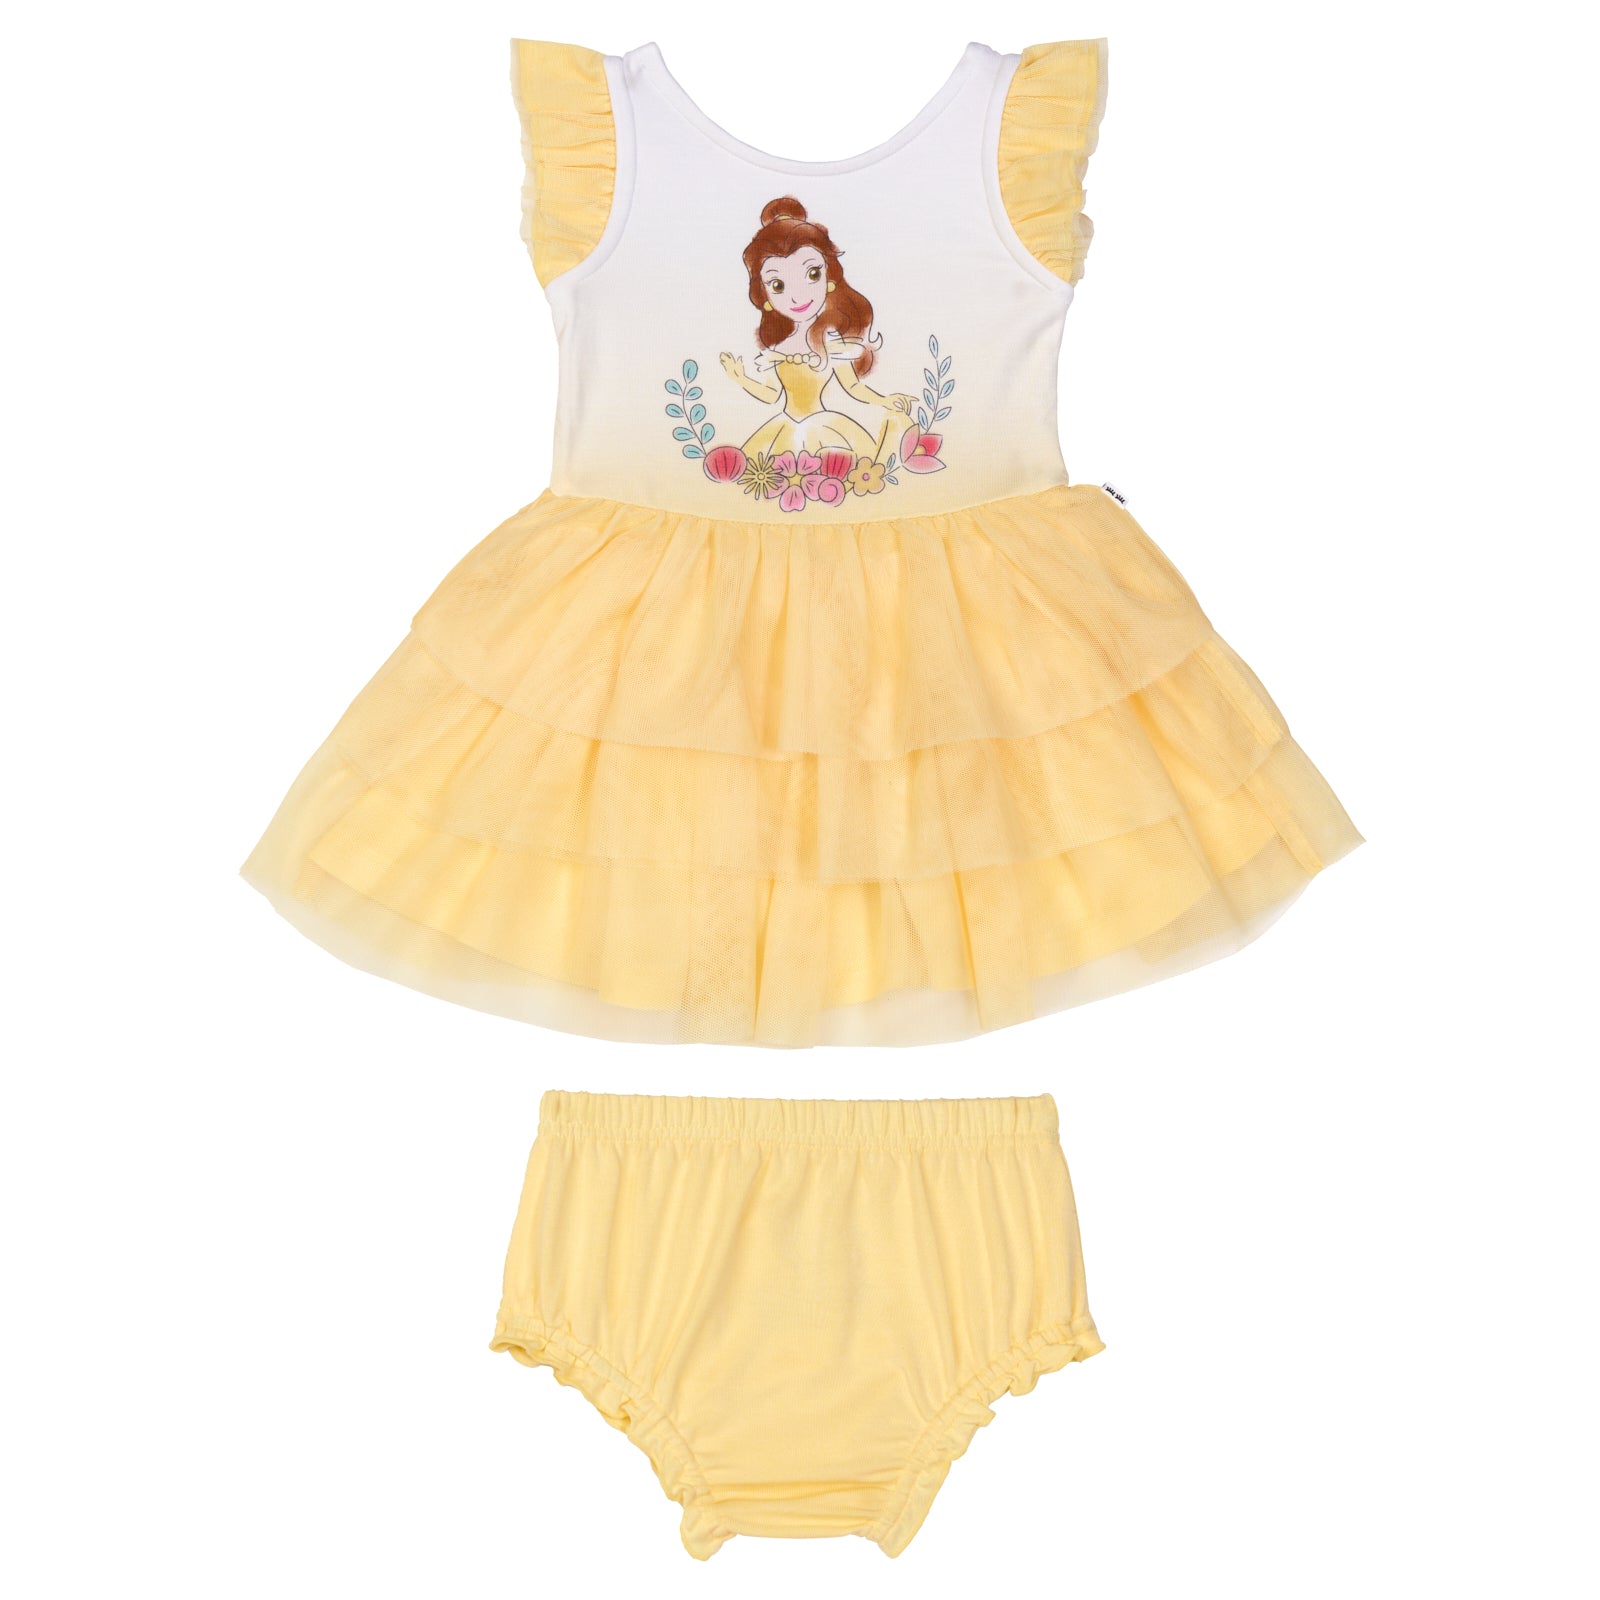 Flat lay image of a Belle flutter tiered tutu dress with bloomer